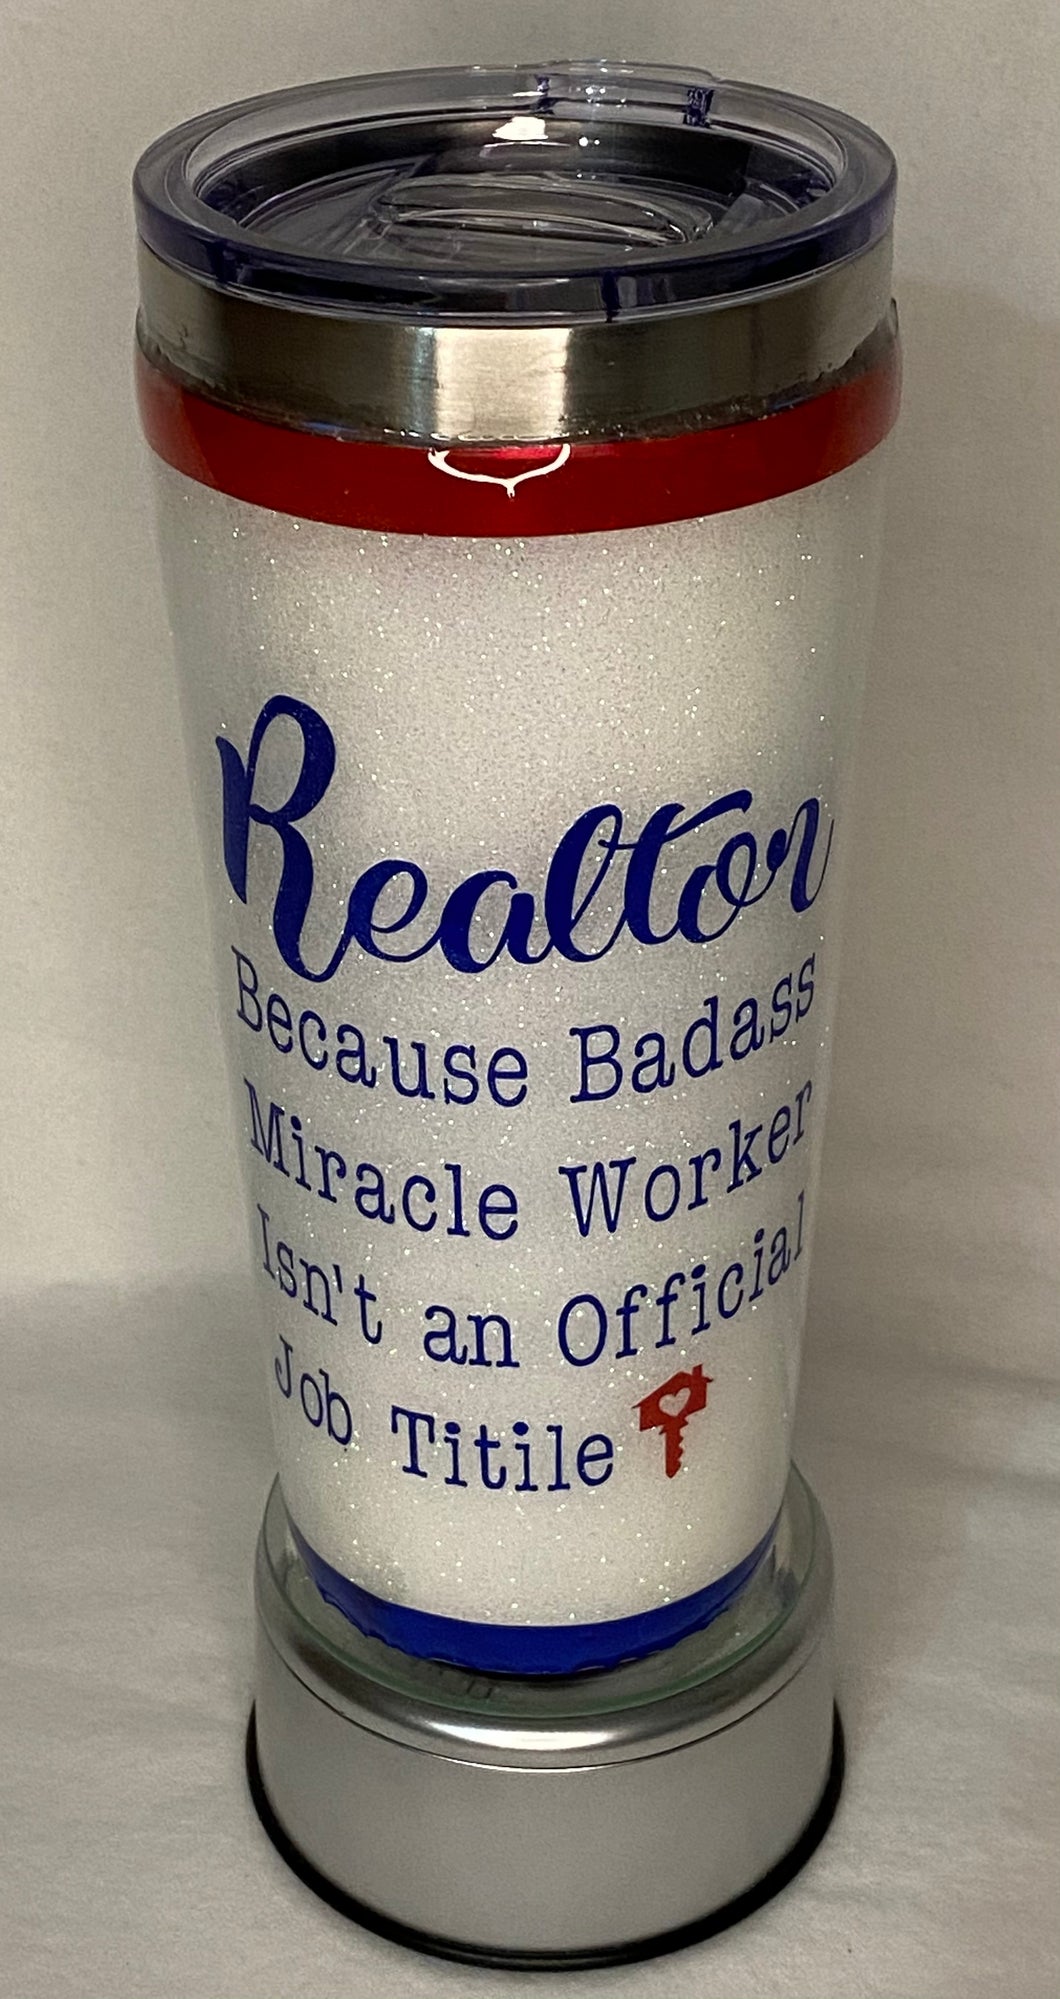 Our Realtor tumblers make the perfect gift for your realtor, lender, or broker. We can customize these with their name or quotes. This particular cup is a 20-ounce stainless steel tumbler that can hold liquids hot/cold for hours. It has the realtor's name on the back and is decorated in glitter, vinyl, and FDA food-approved epoxy. We can personalize and design these tumblers any way you like. We can design by color, size, and your preference for personalization. These cups take 1-2 weeks.